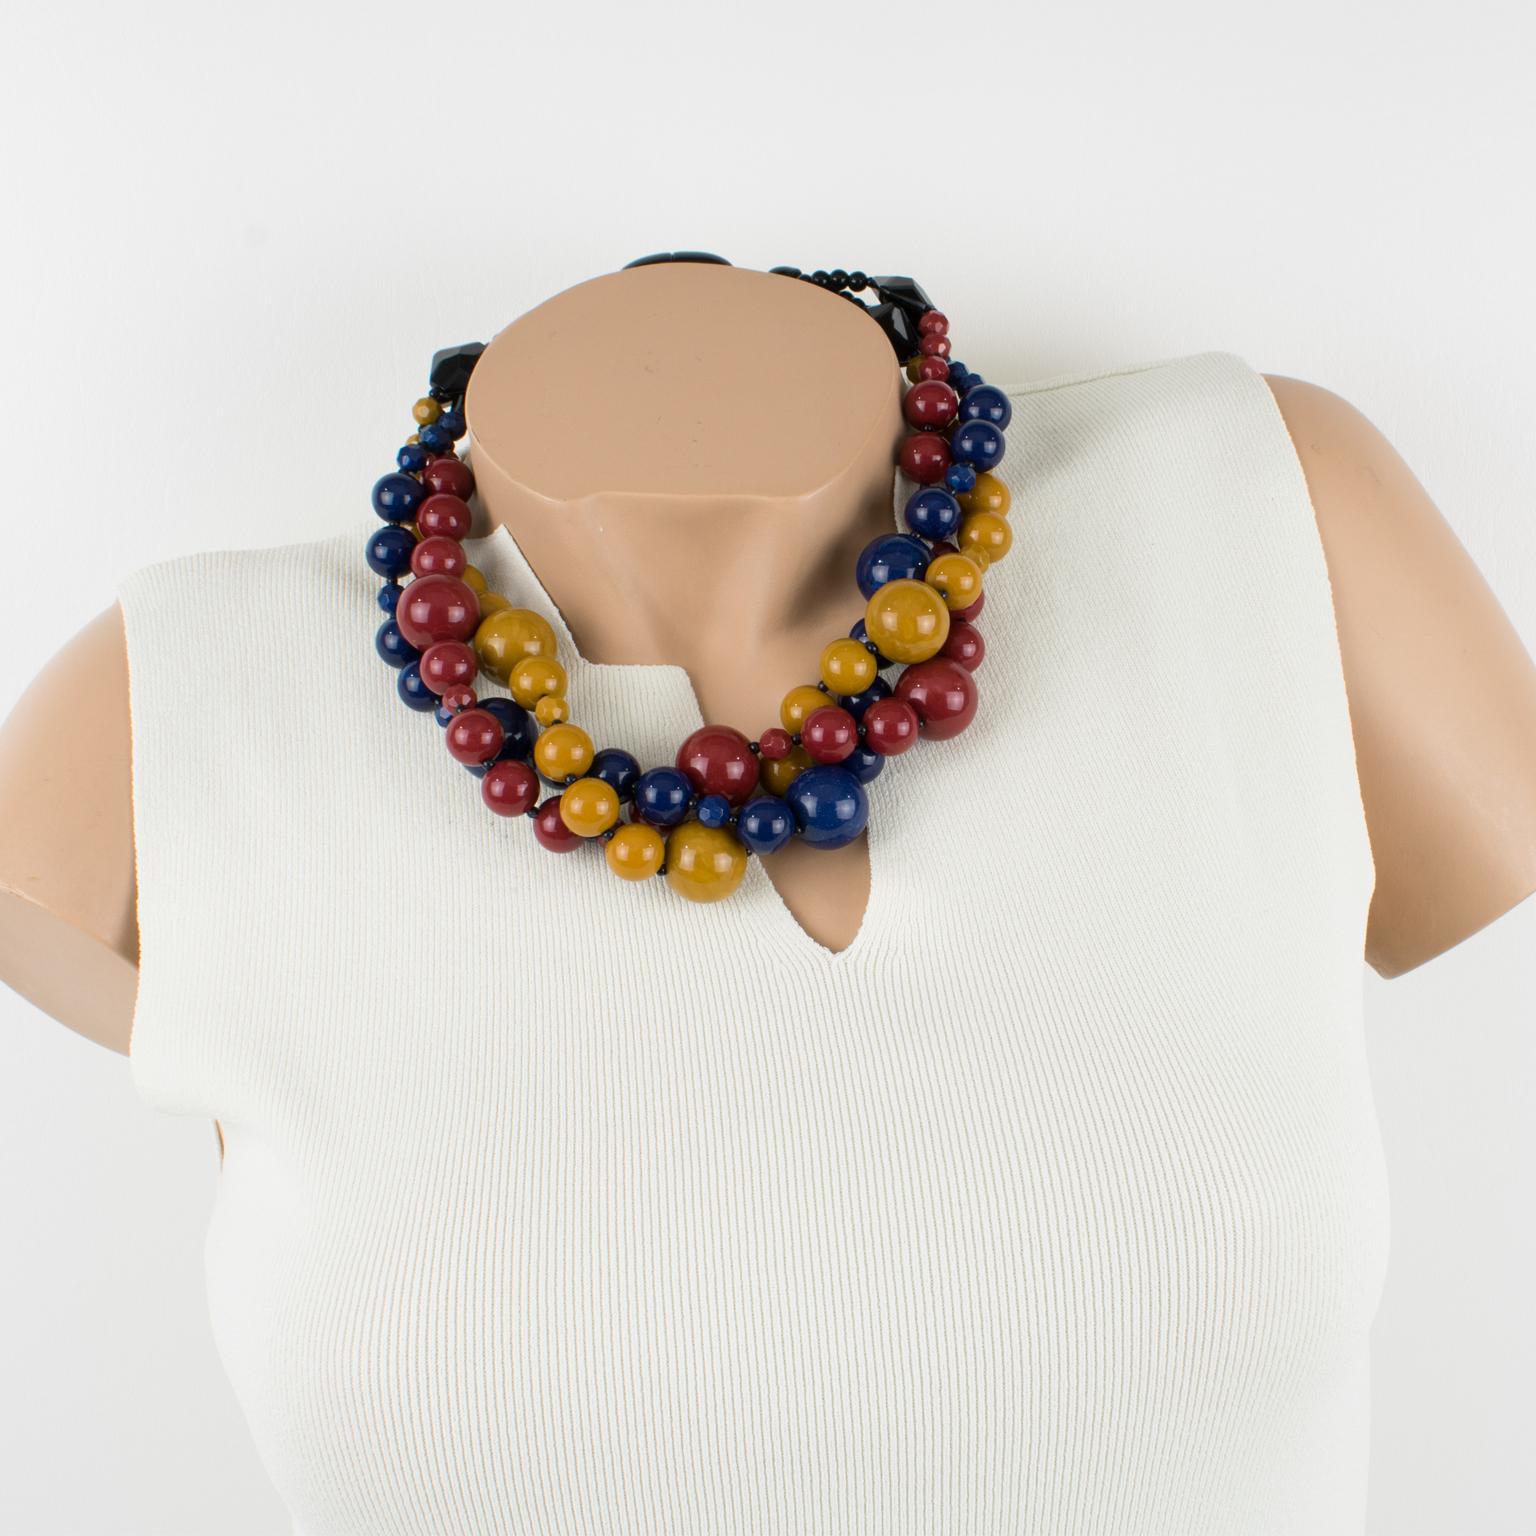 This charming Angela Caputi, made in Italy resin choker beaded necklace features an oversized multi-strand design with assorted size beads in burgundy red, black, yellow Dijon mustard, and navy blue colors. Her matching colors are always extremely